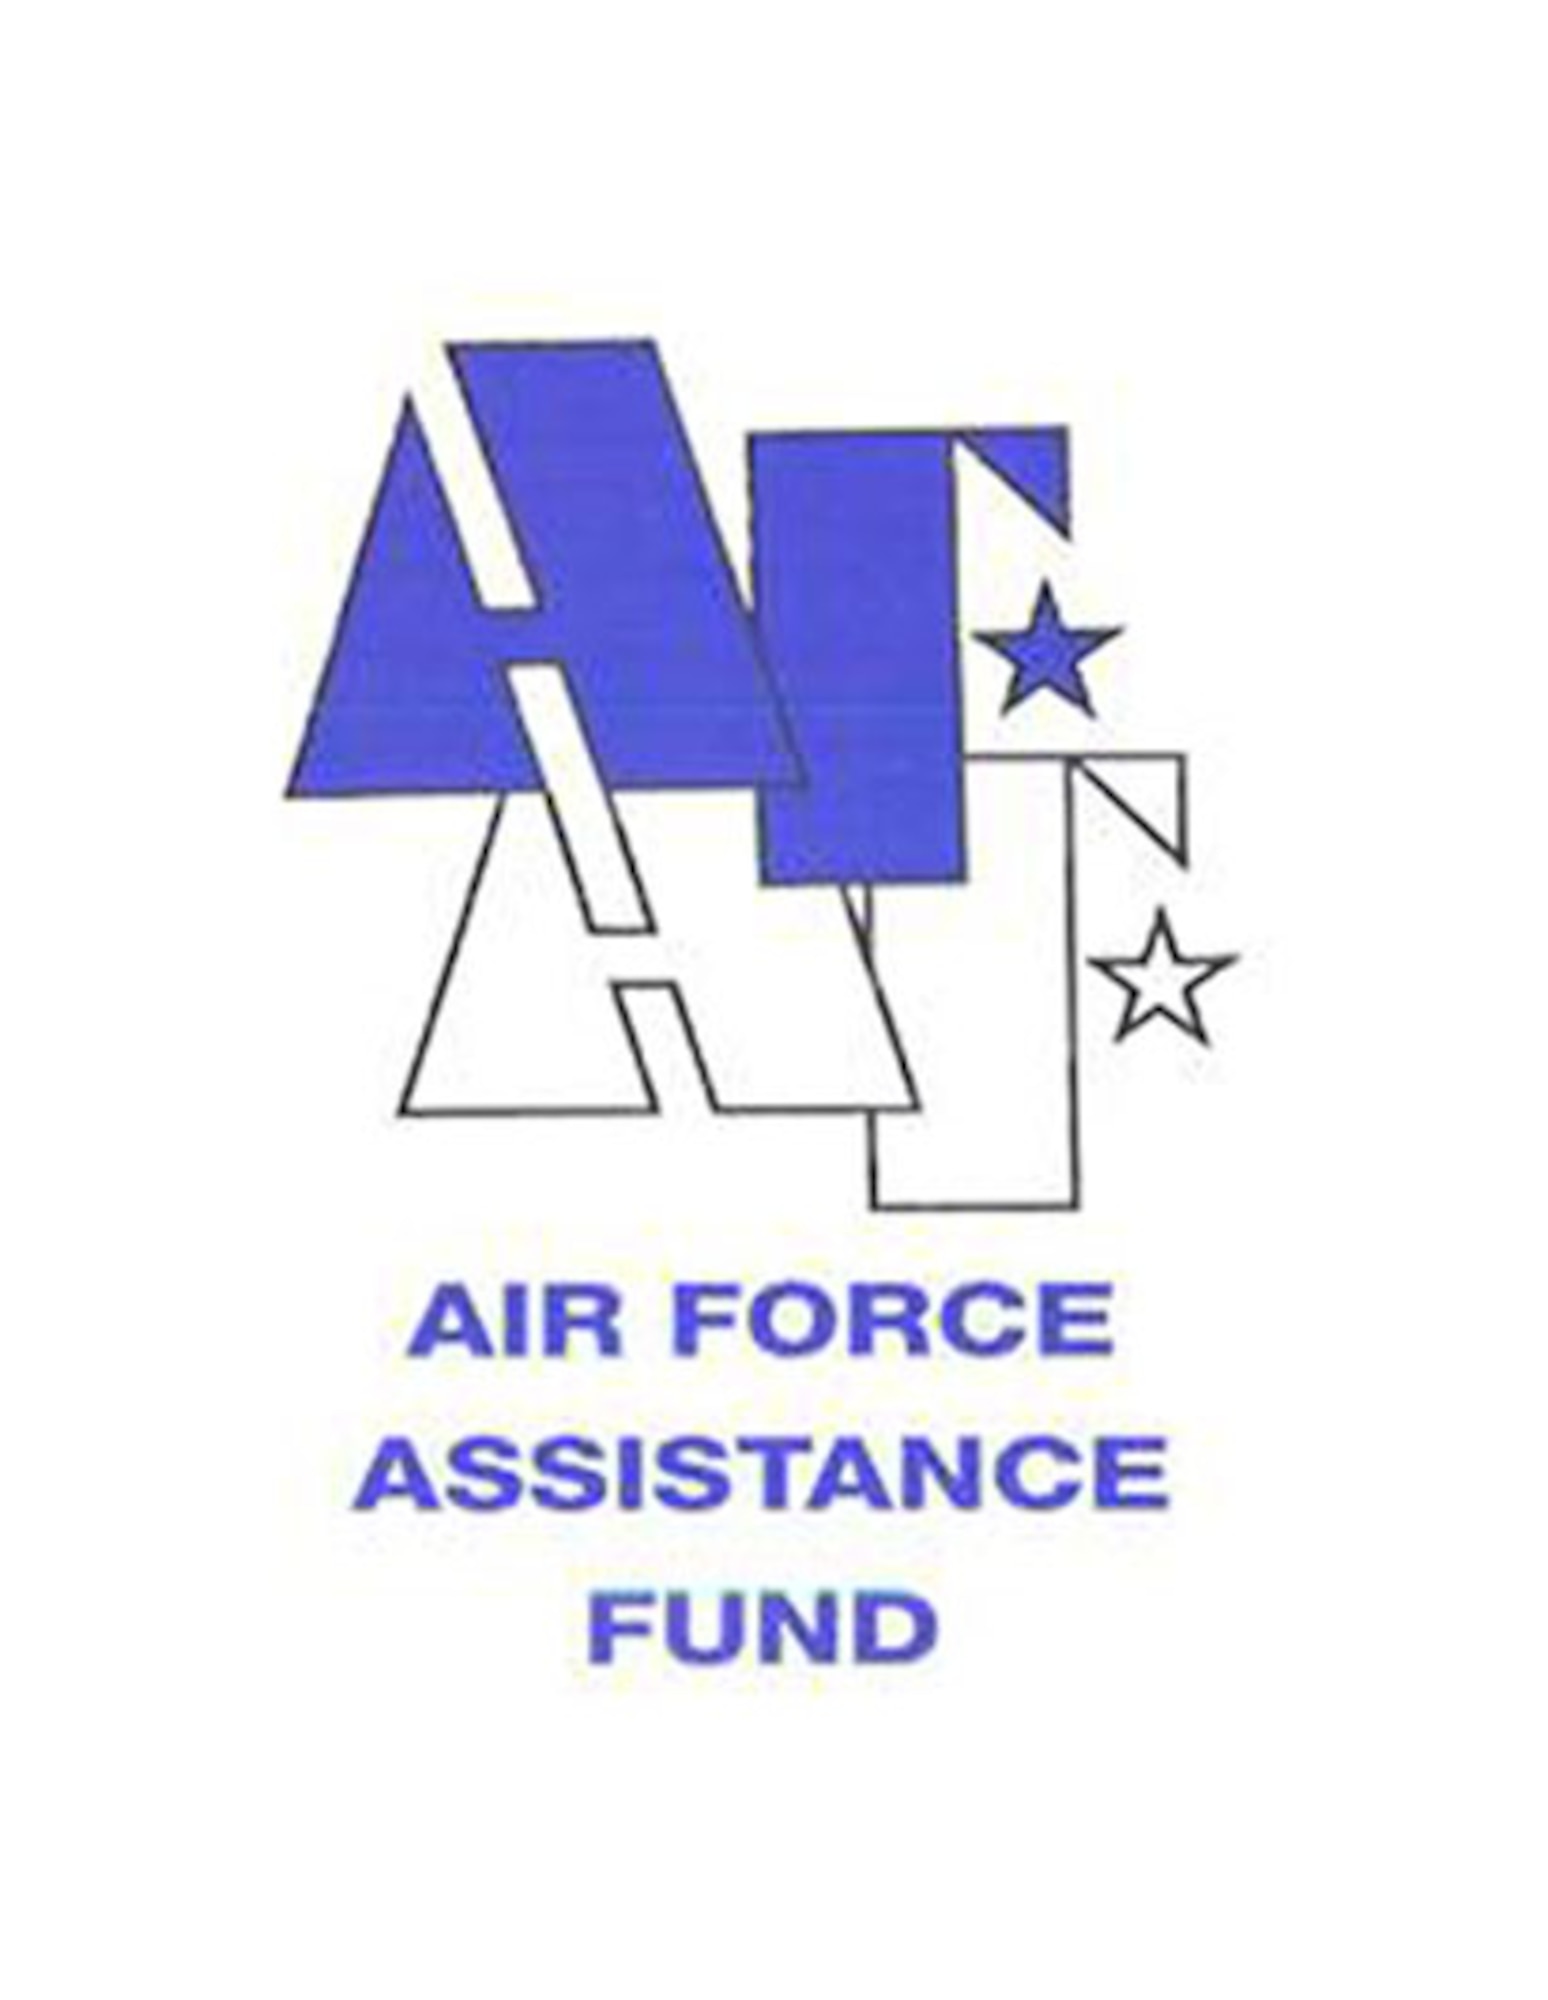 The Air Force Assistance Fund is set to receive donations from Vandenberg personnel, here, March 2 through April 12. Since its inception, the Air Force has embraced a strong sense of community by promoting programs aimed at taking care of its Airmen. (U.S. Air Force courtesy graphic) 